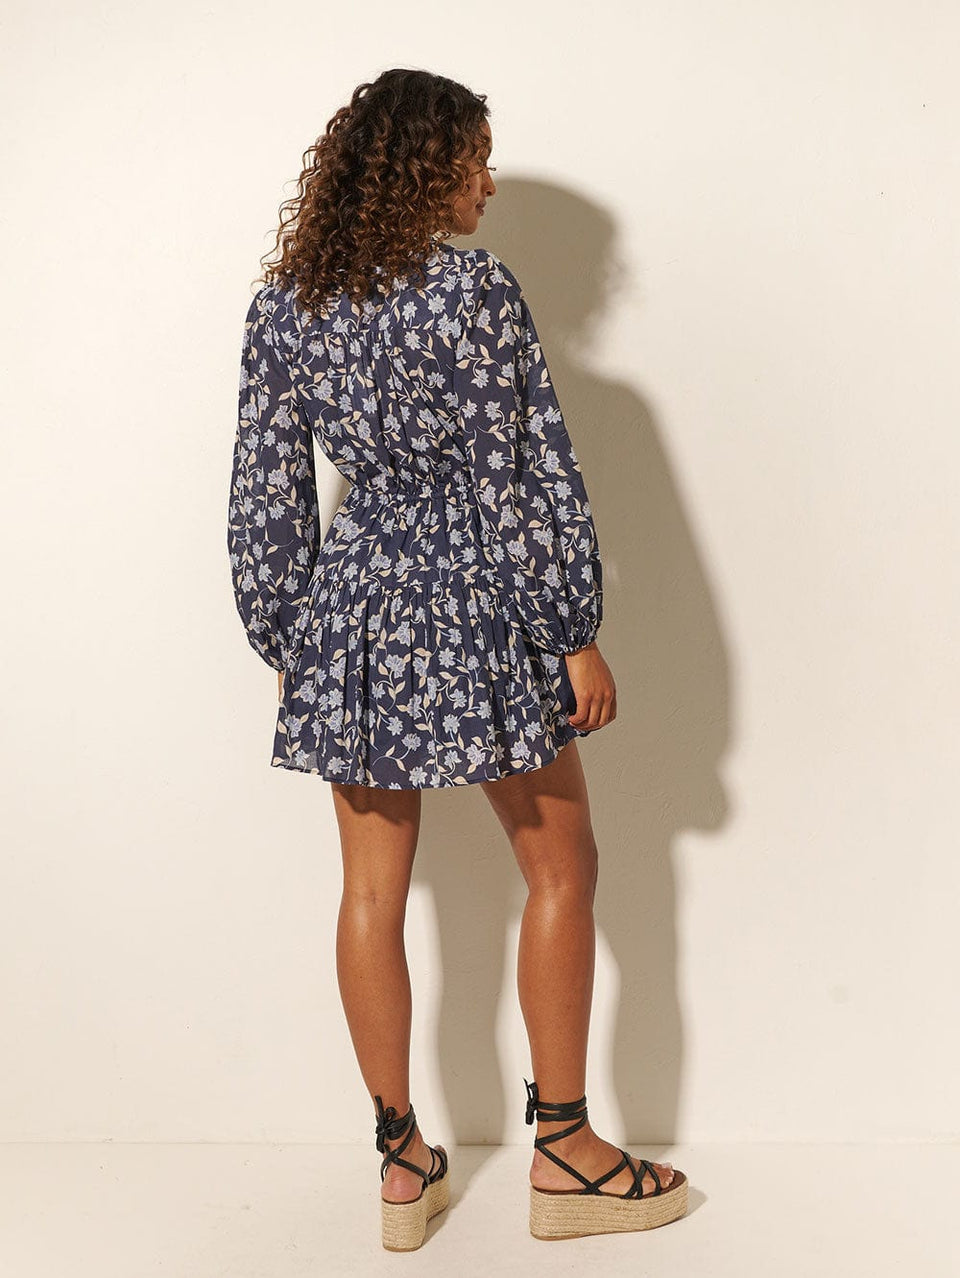 Back shot: Studio model wears KIVARI Jeanne Mini Dress: A navy and sky blue floral dress made from cotton and featuring a button front, elasticated waist tie, full-length blouson sleeves and frill collar detail.